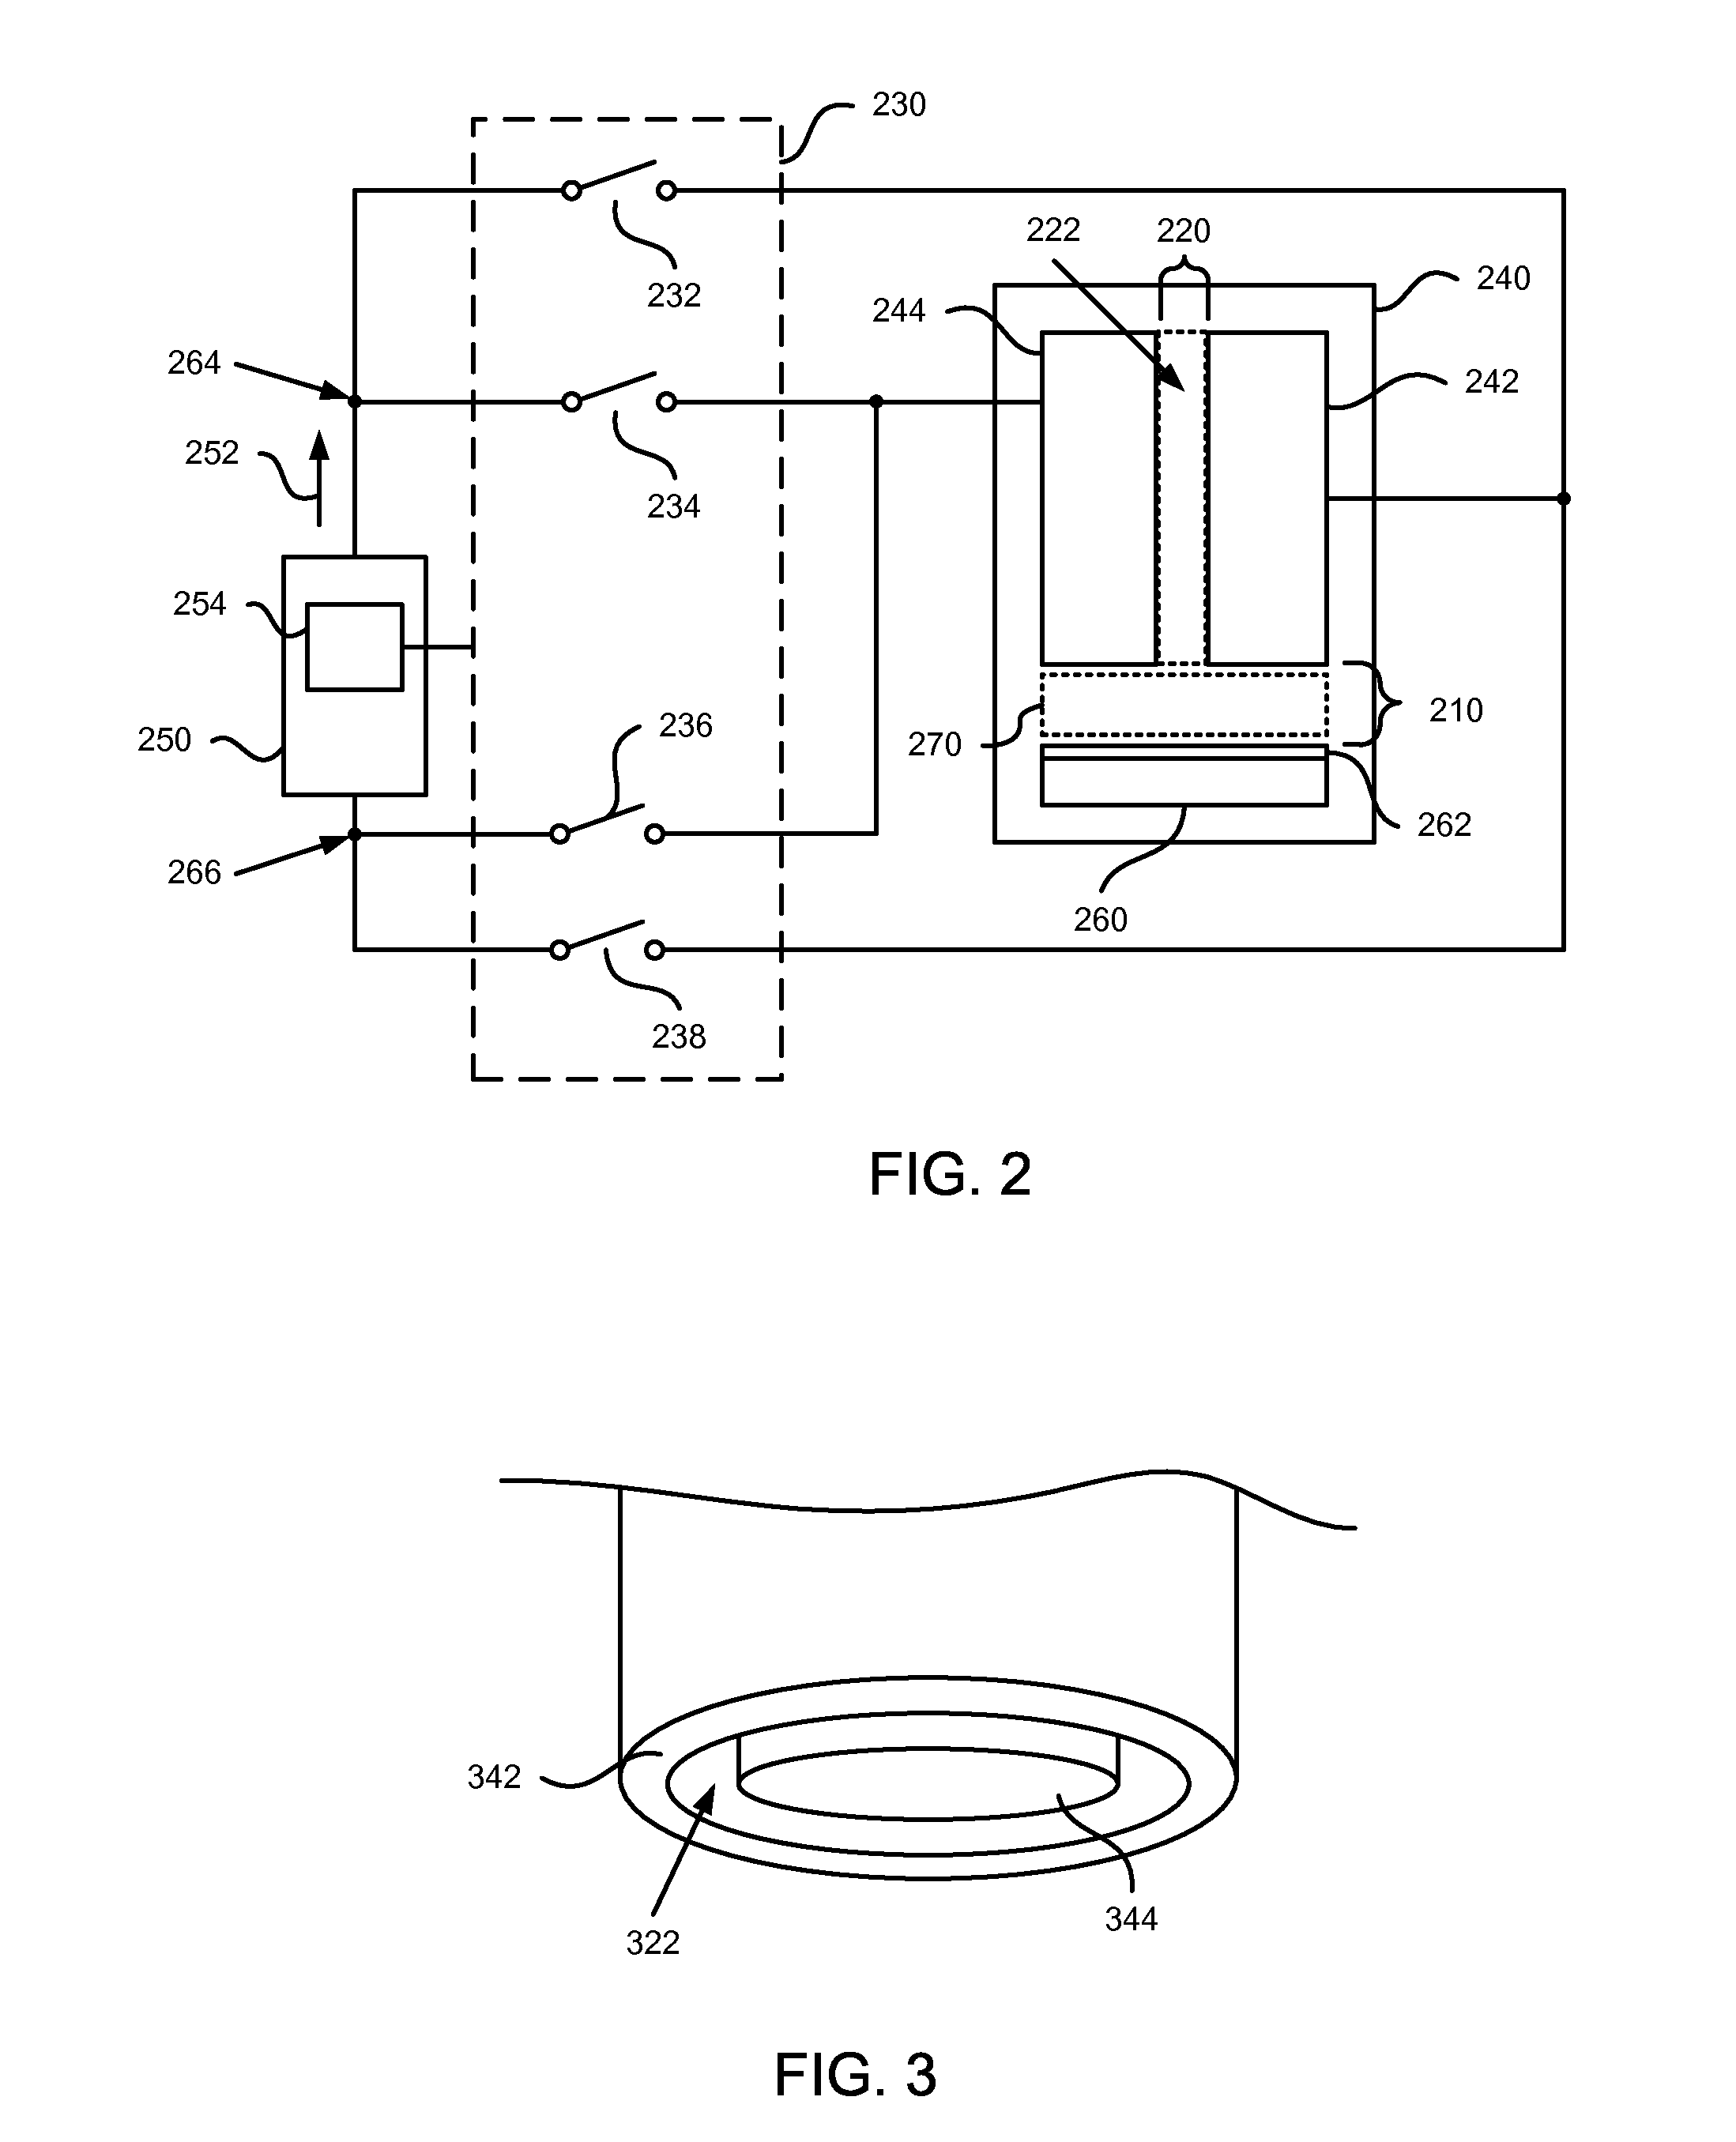 Methods and apparatus for applying periodic voltage using direct current